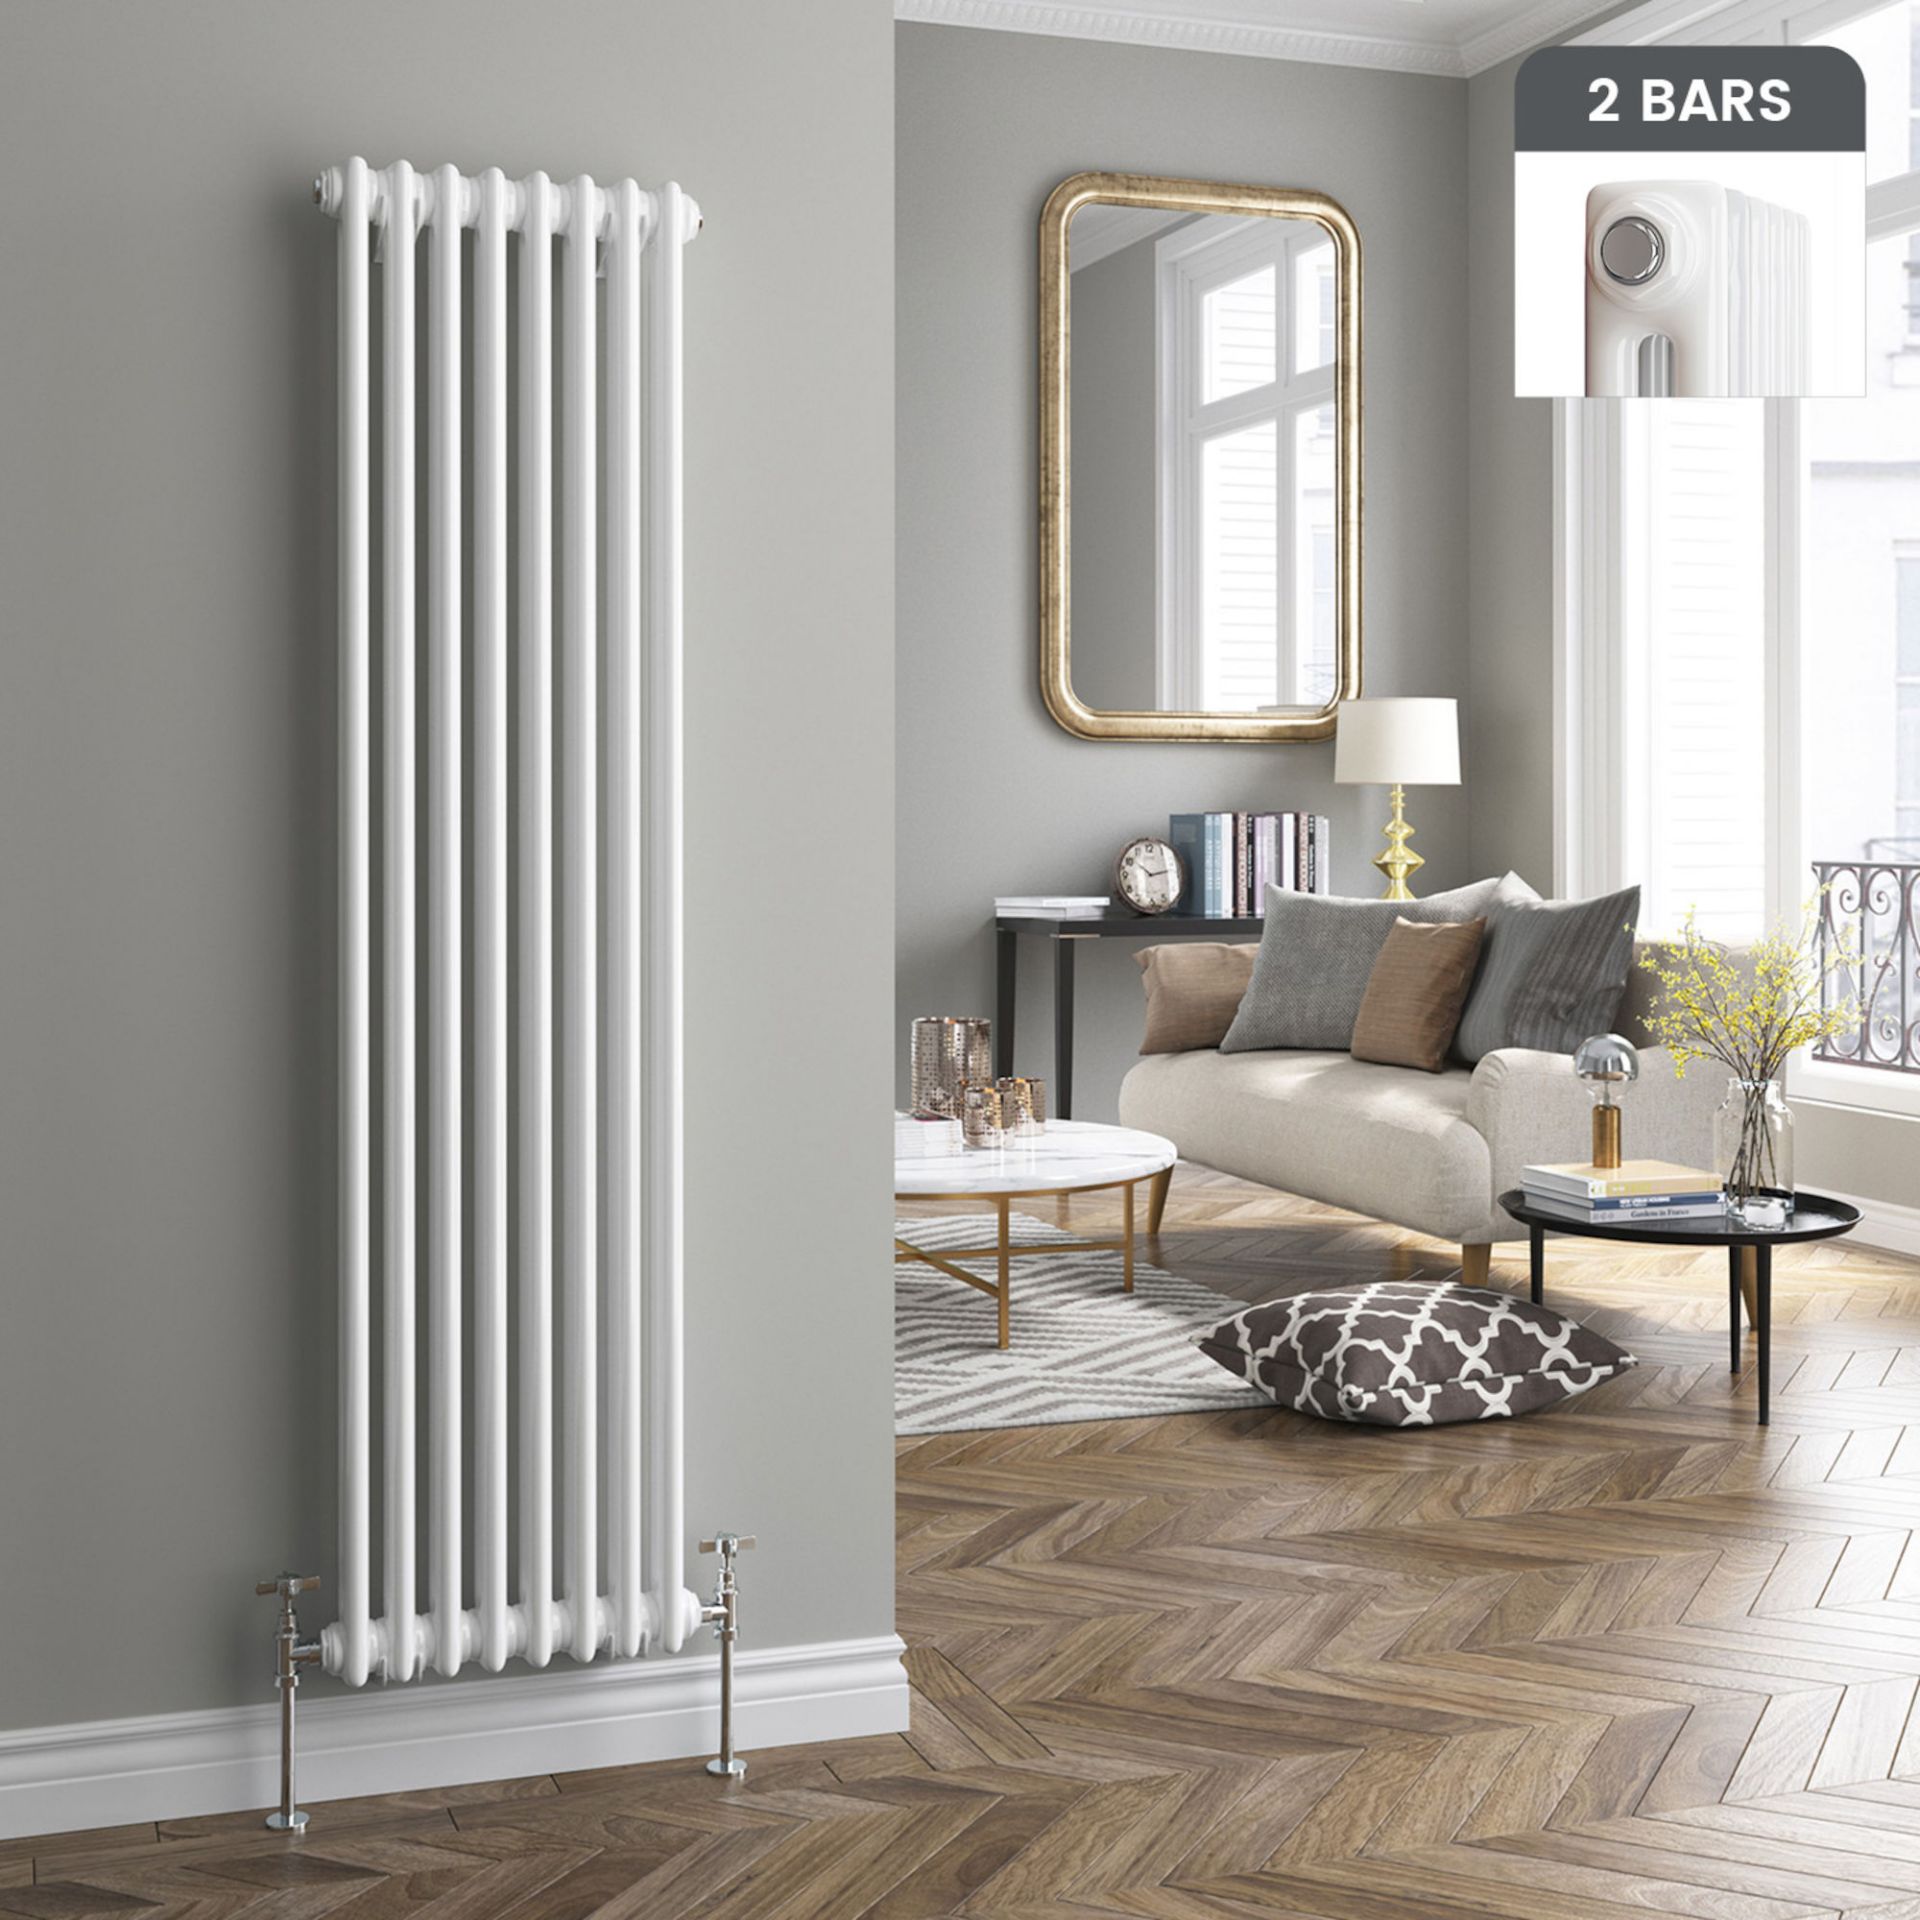 (DK126) 1500x380mm White Double Panel Vertical Colosseum Traditional Radiator. RRP £369.99. Made